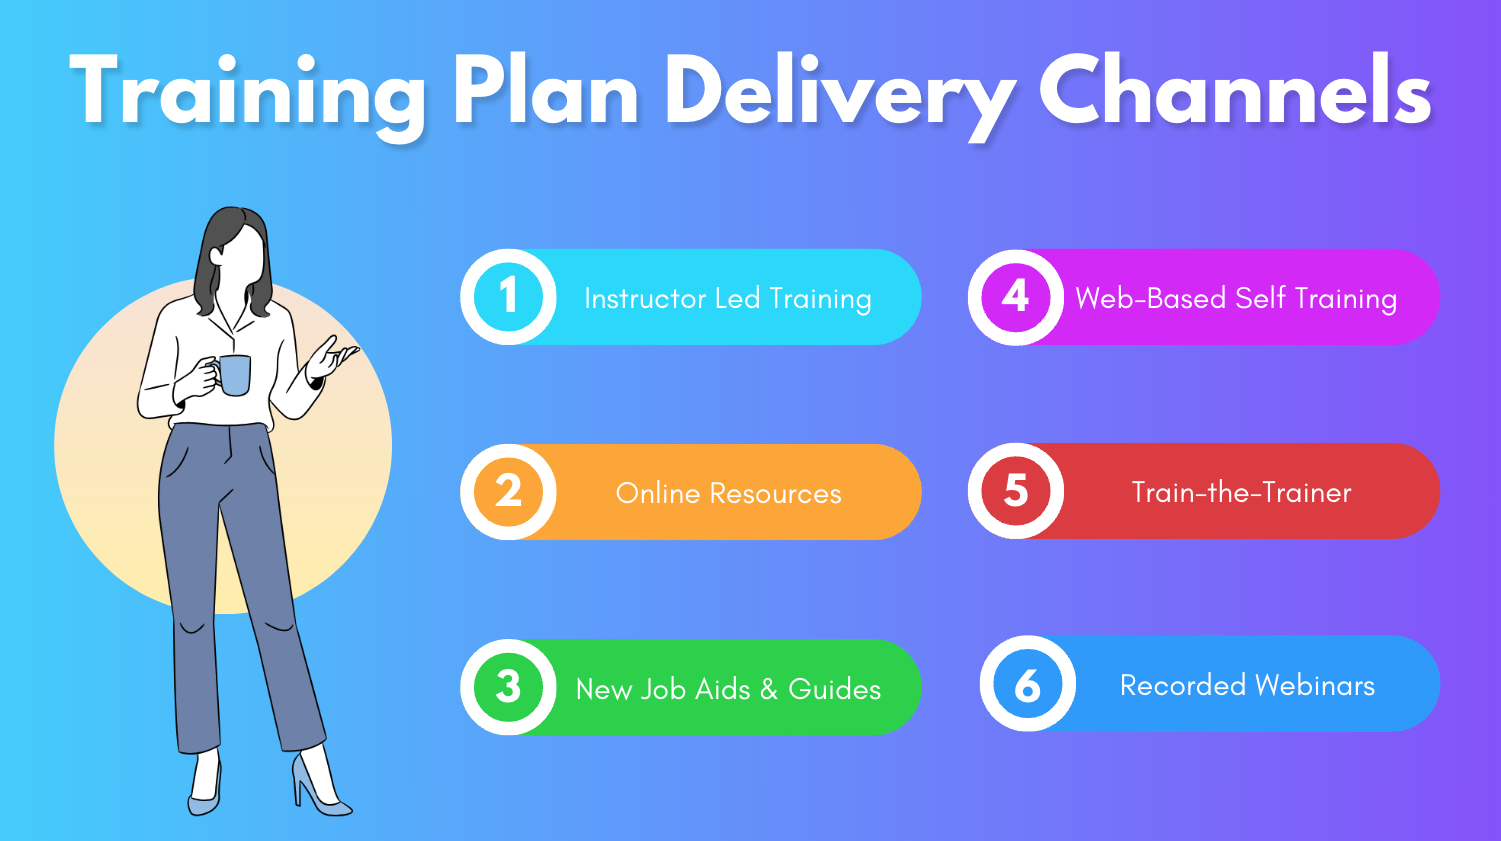 Training Channels and Delivery Methods